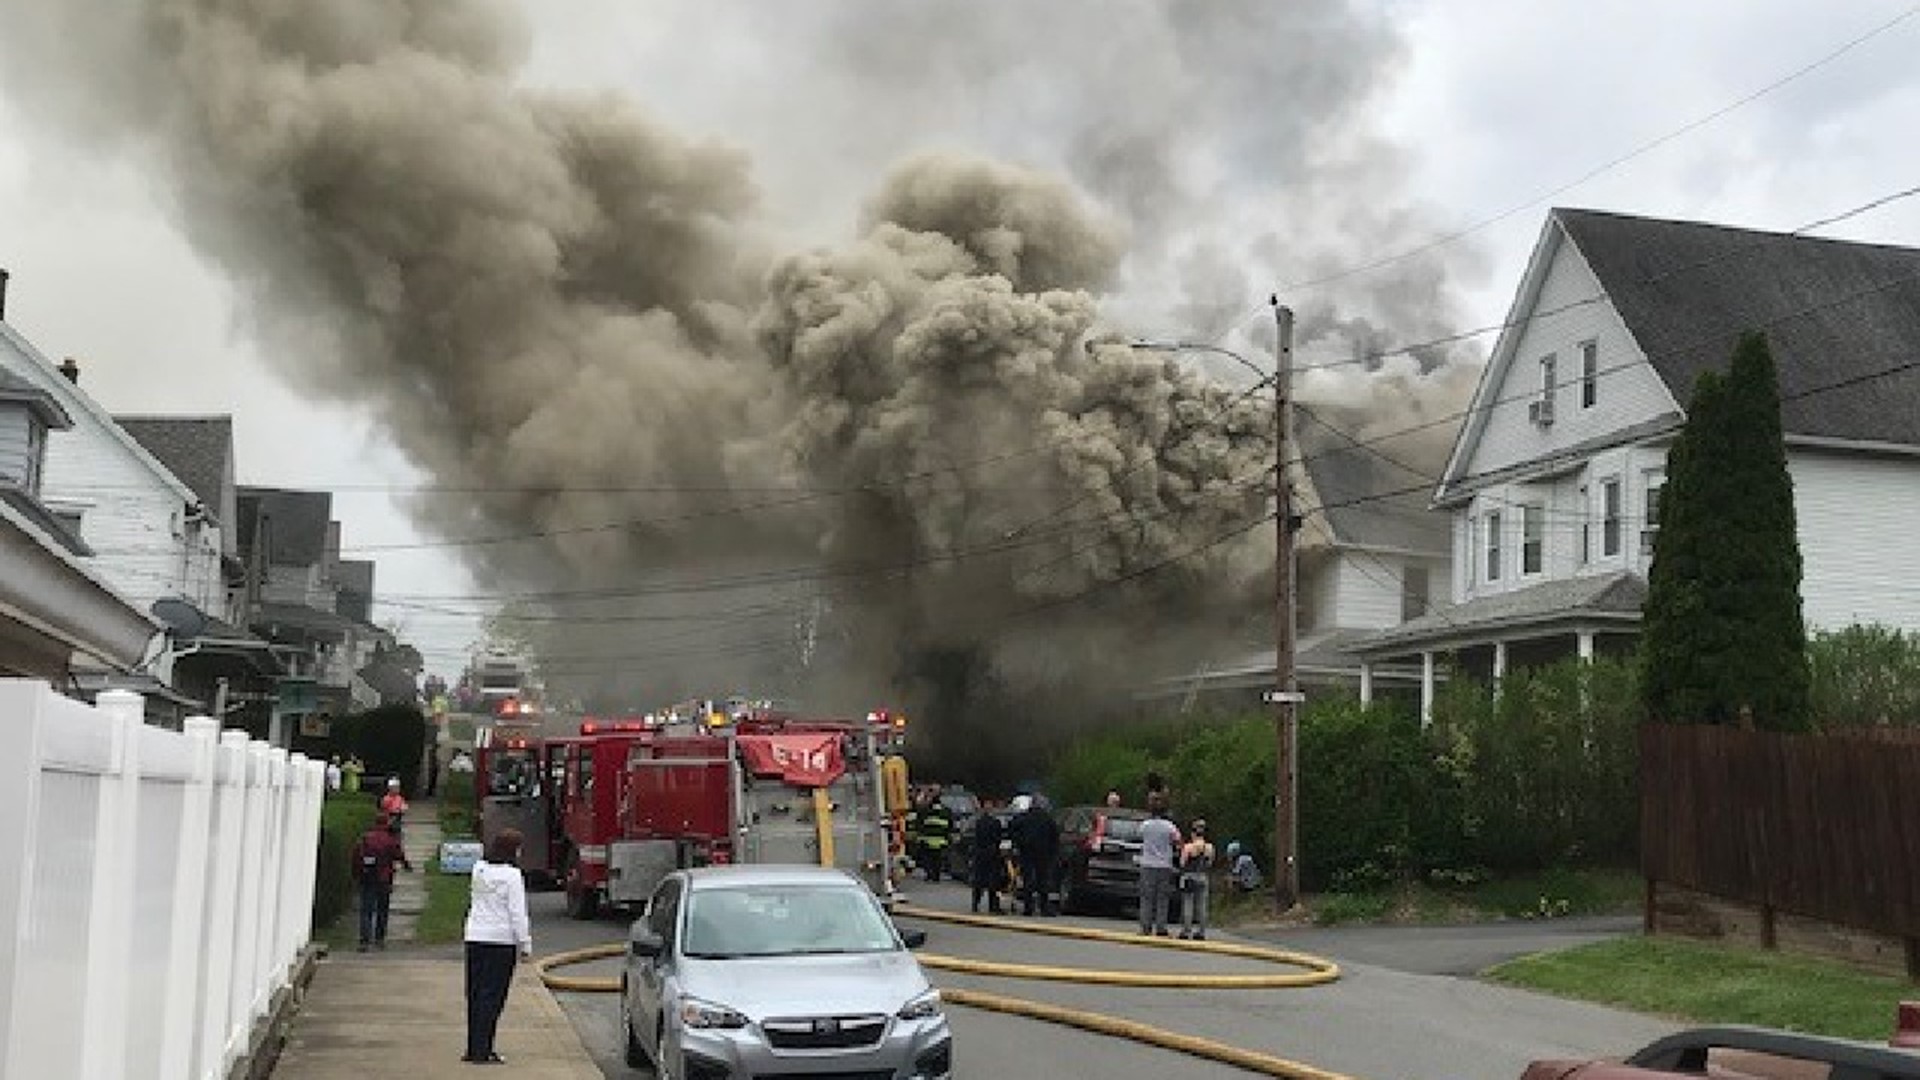 Crews in Lackawanna County were called out Monday morning to fire the fire in West Side.